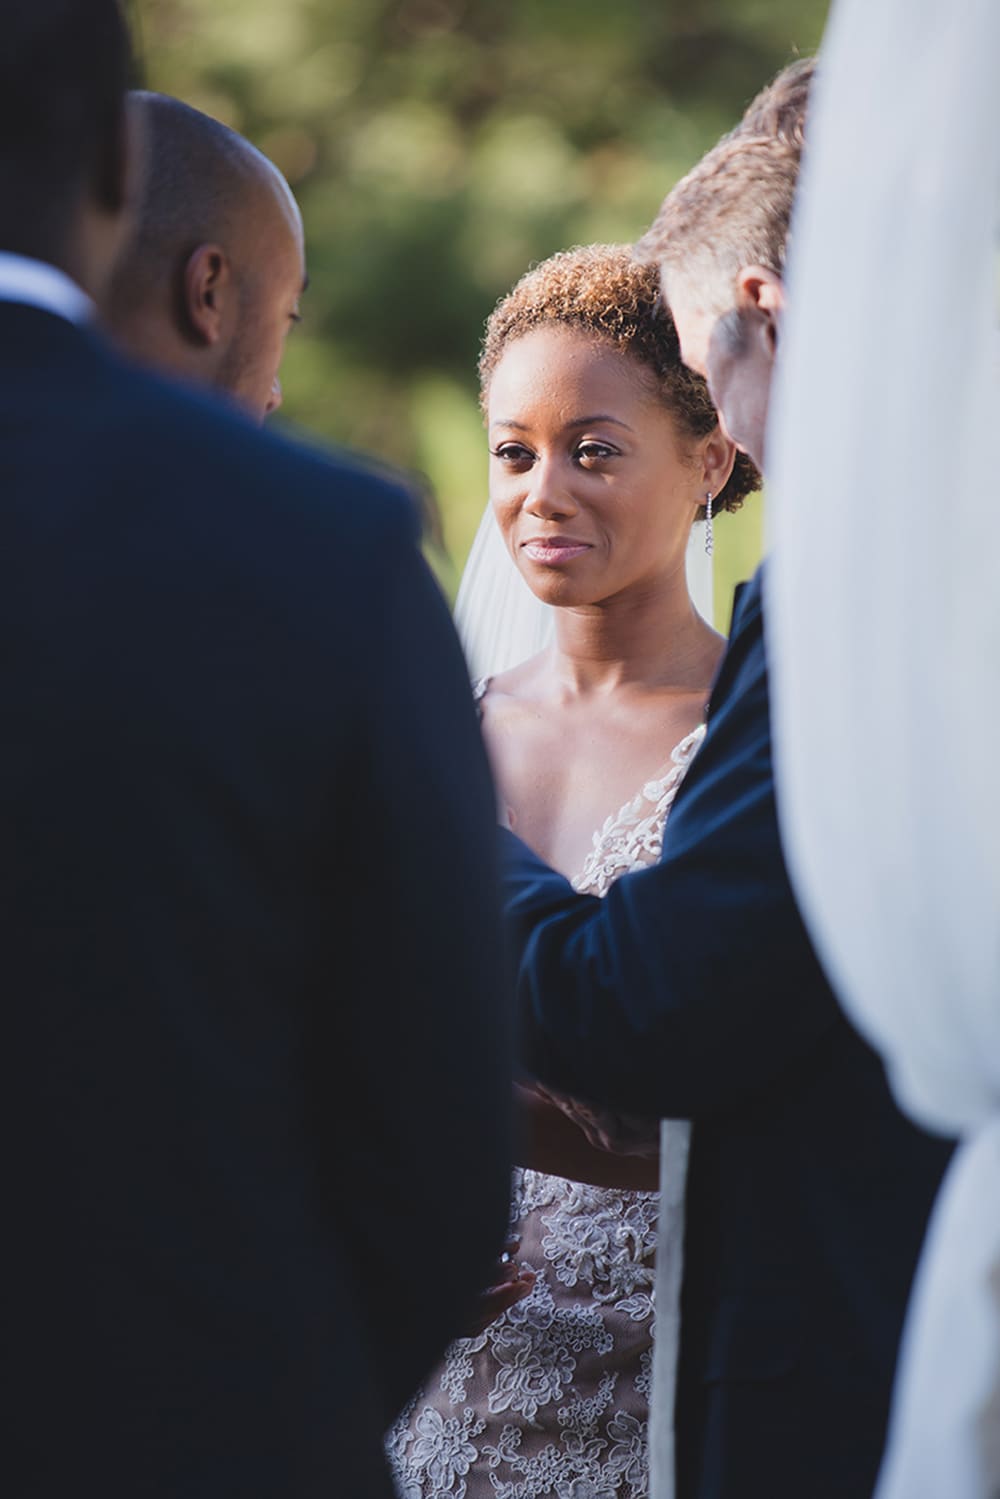 A documentary portrait of a bride during her wedding ceremony on Martha's Vineyard